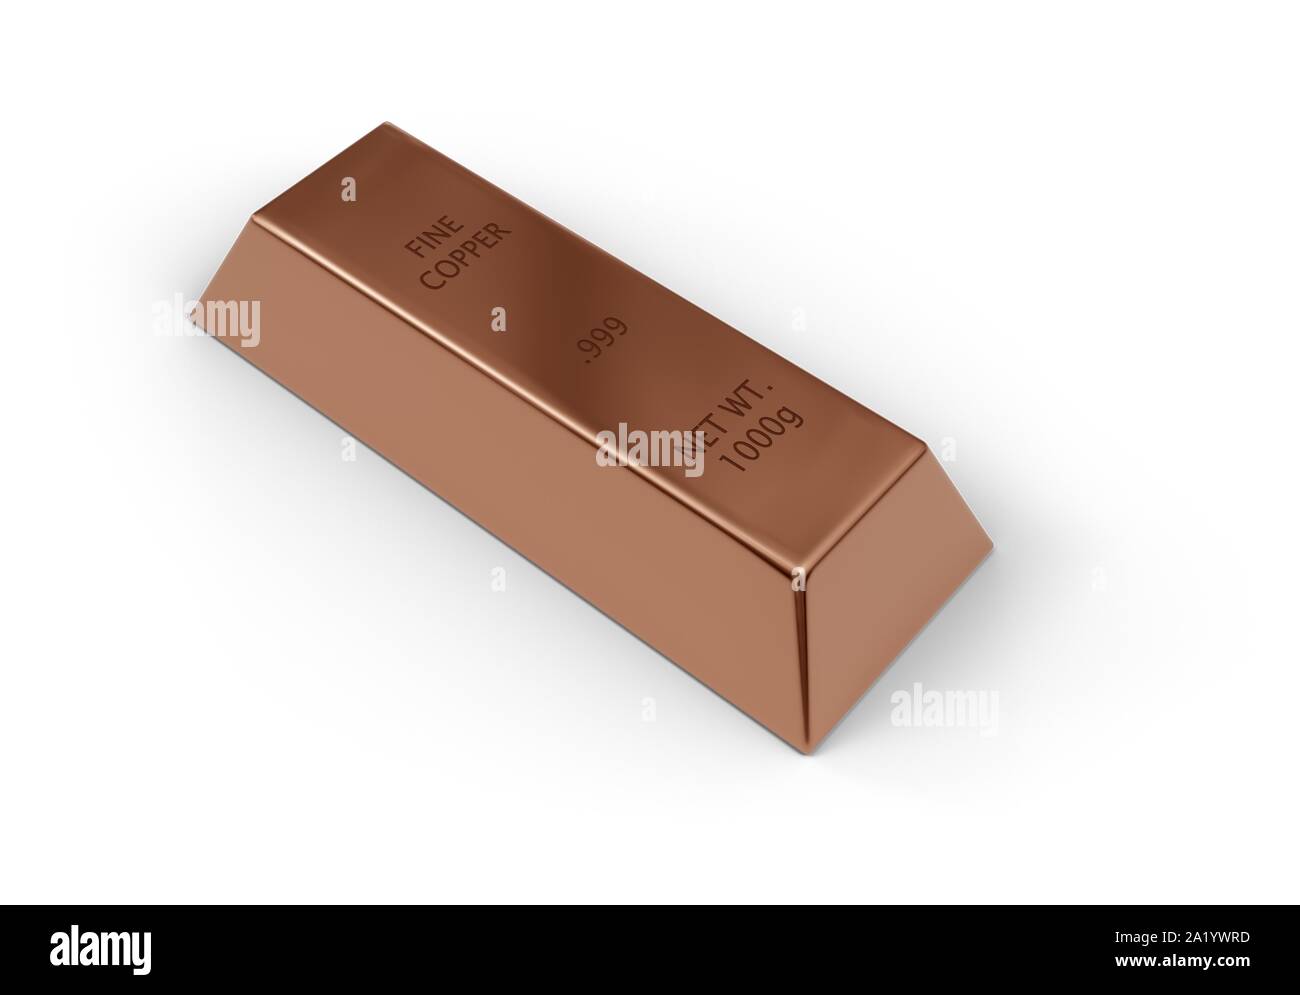 Shiny copper ingot or bar over white background - essential electronics  production metal or money investment concept, 3D illustration Stock Photo -  Alamy